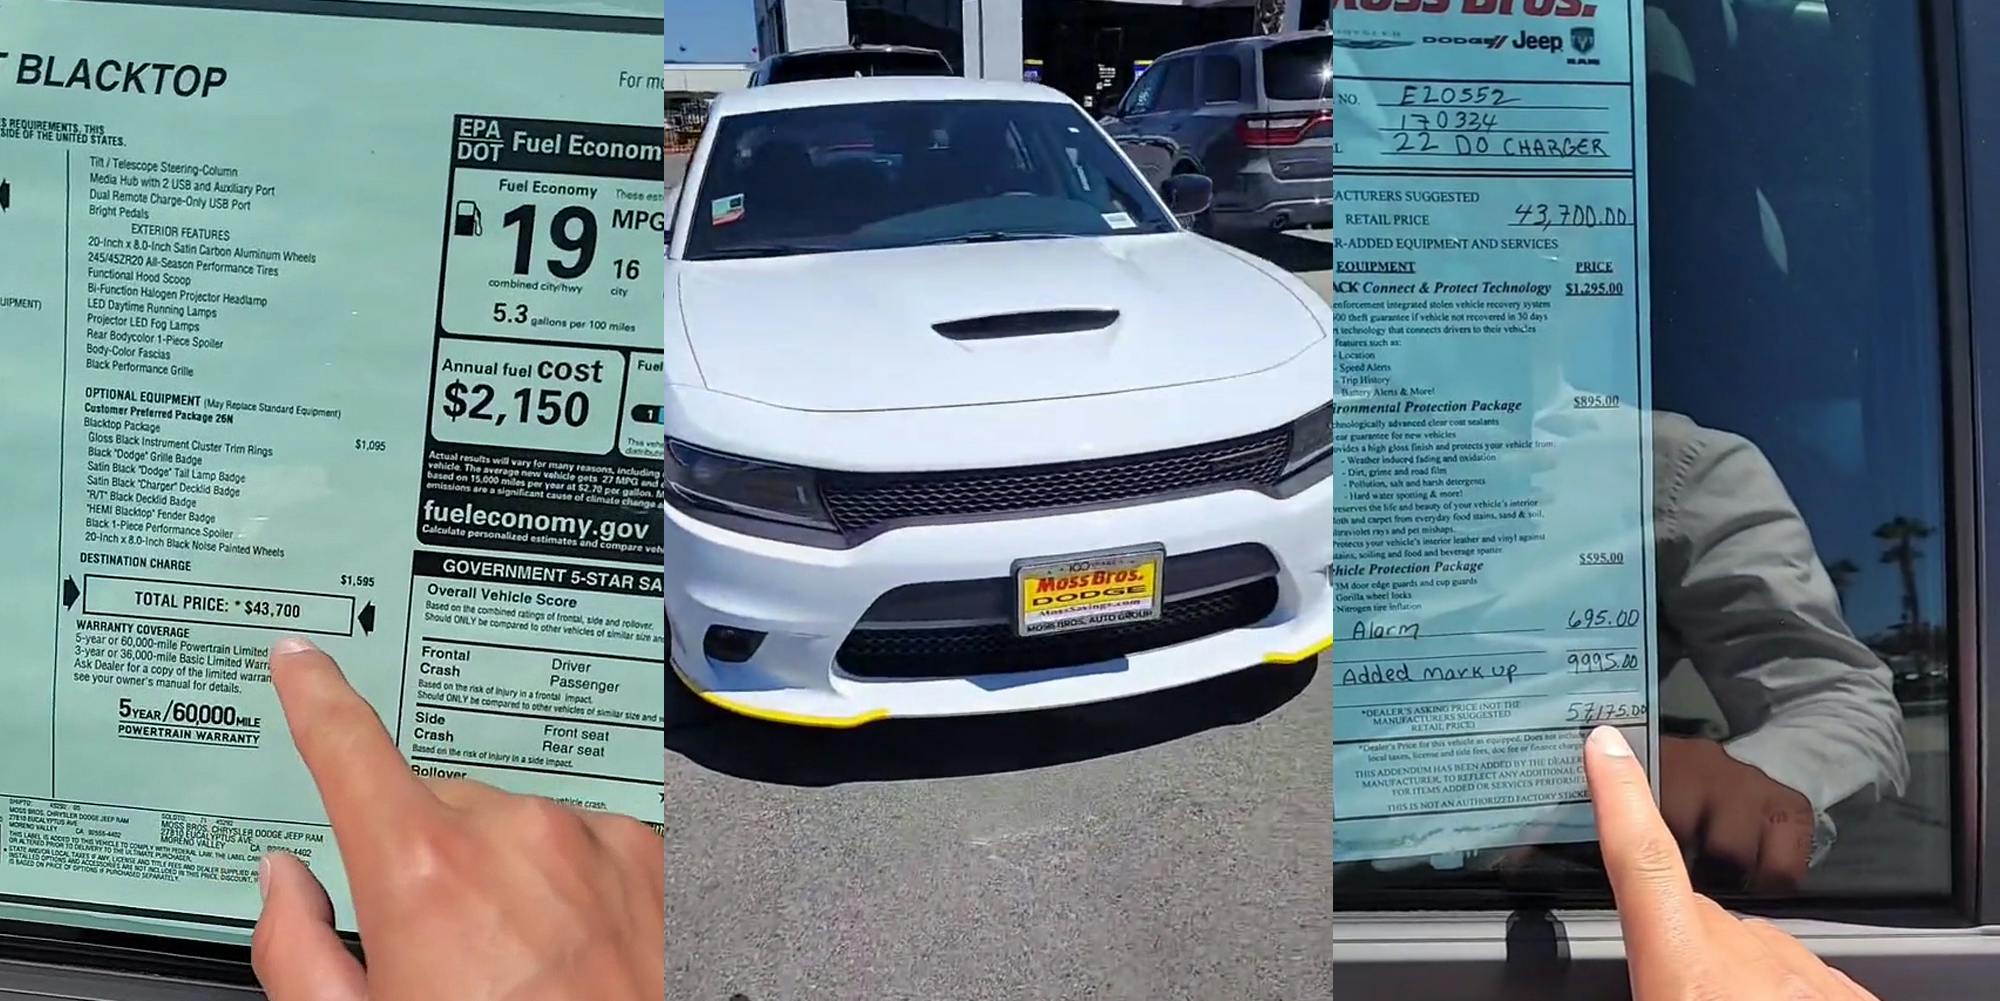 man pointing to paper in car window "TOTAL PRICE *$43,700" (l) white Dodge in dealership parking lot (c) man pointing to paper in car window "Alarm 695.00 Added Markup 9995.00 57,175.00" (r)